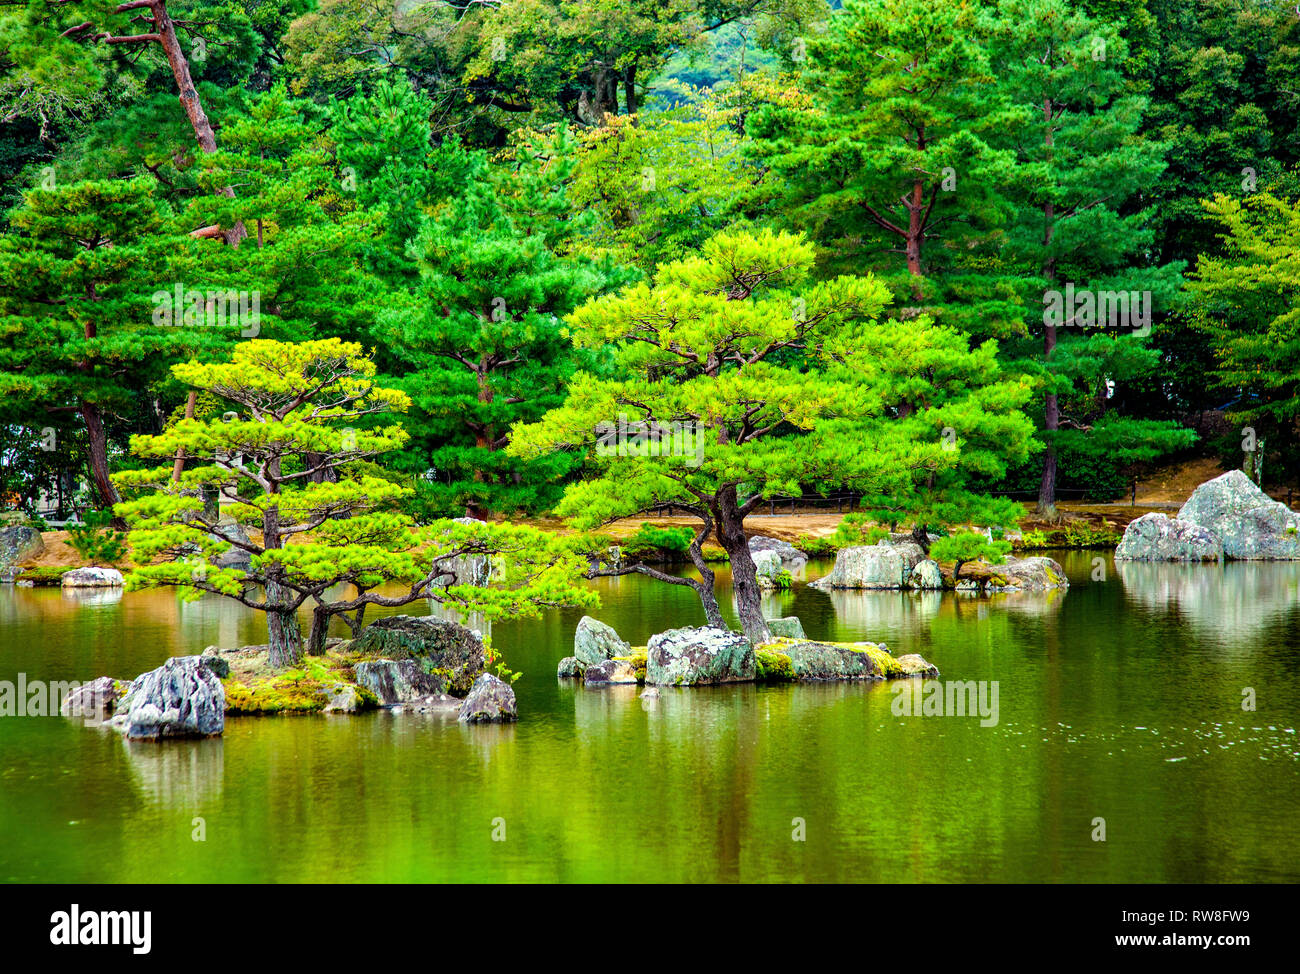 Magnificent historic gardens at Kyoto in Japan with reflections in lake Stock Photo